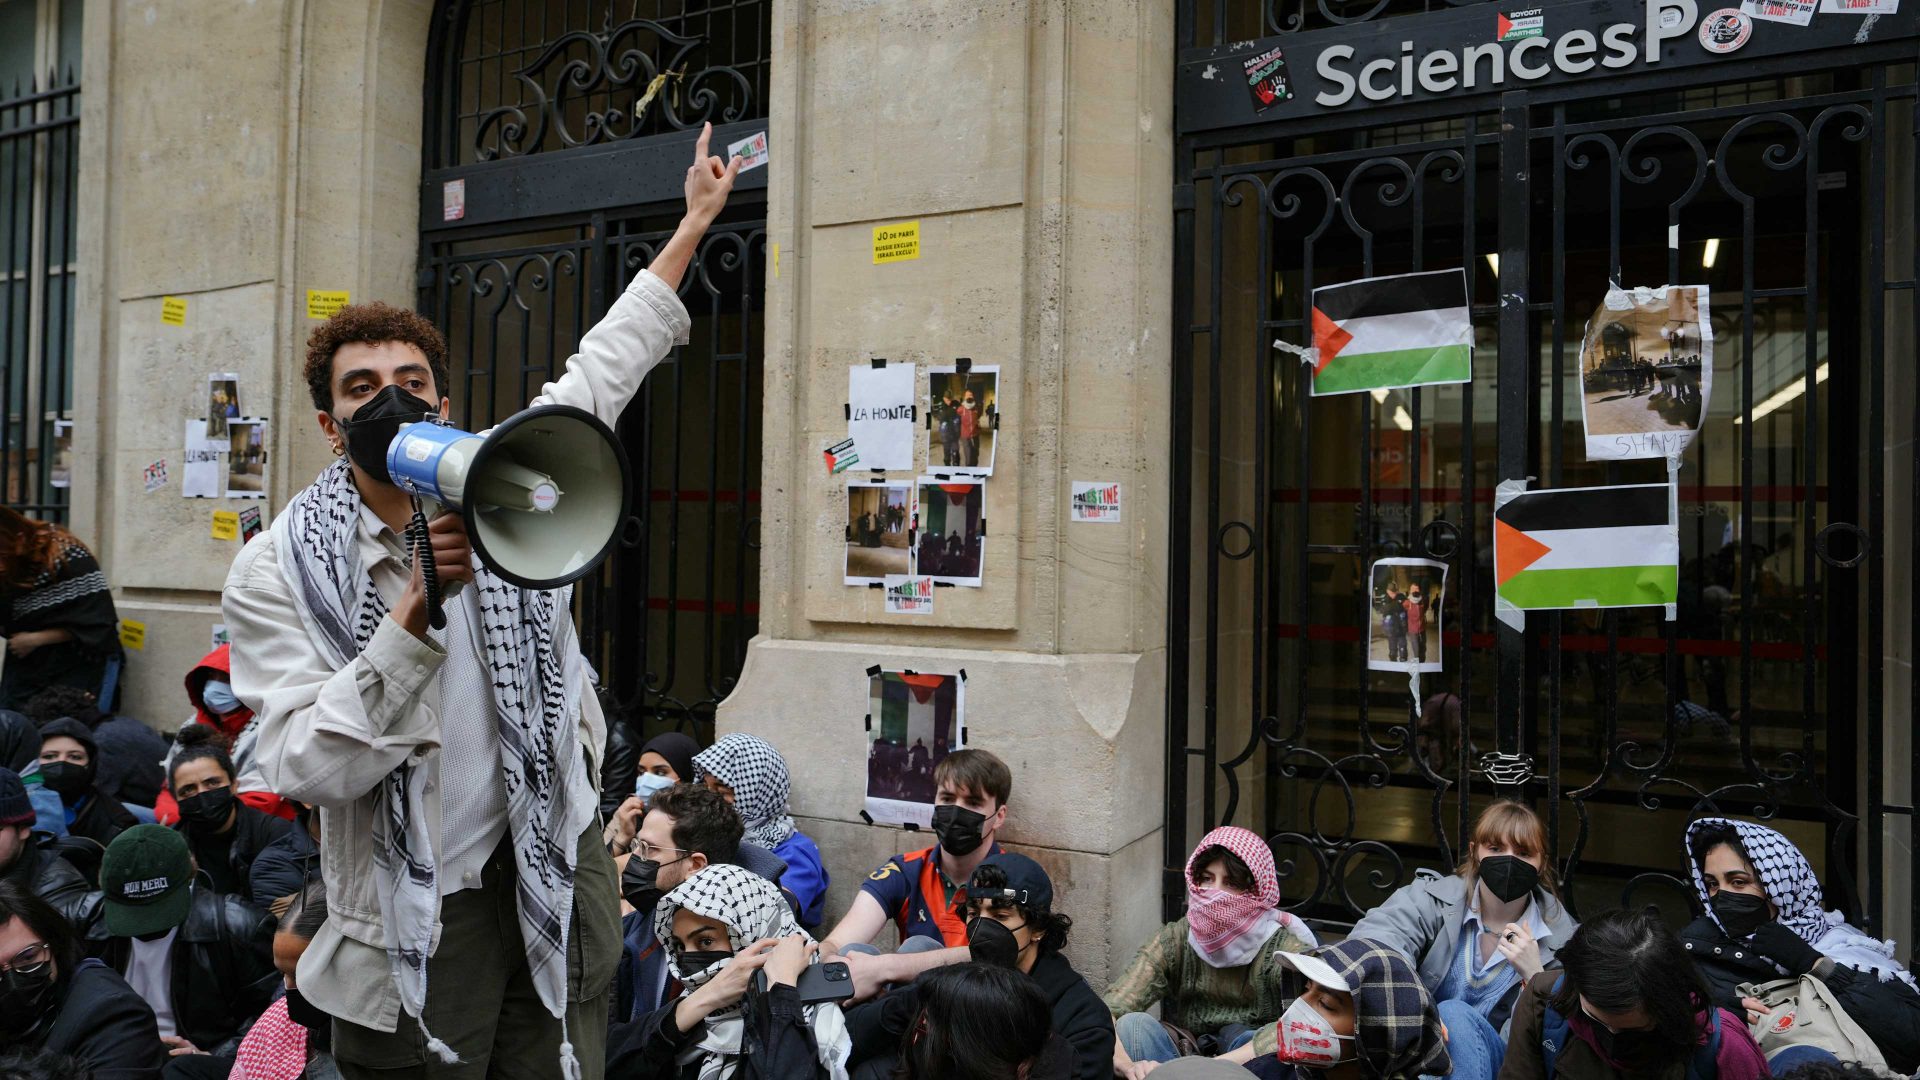 Protesters stage a sit-in in front of the entrance of the Institute of Political Studies (Sciences Po Paris) as they take part in a demonstration in front of the building occupied by students, in support of Palestinians. Photo: DIMITAR DILKOFF/AFP via Getty Images